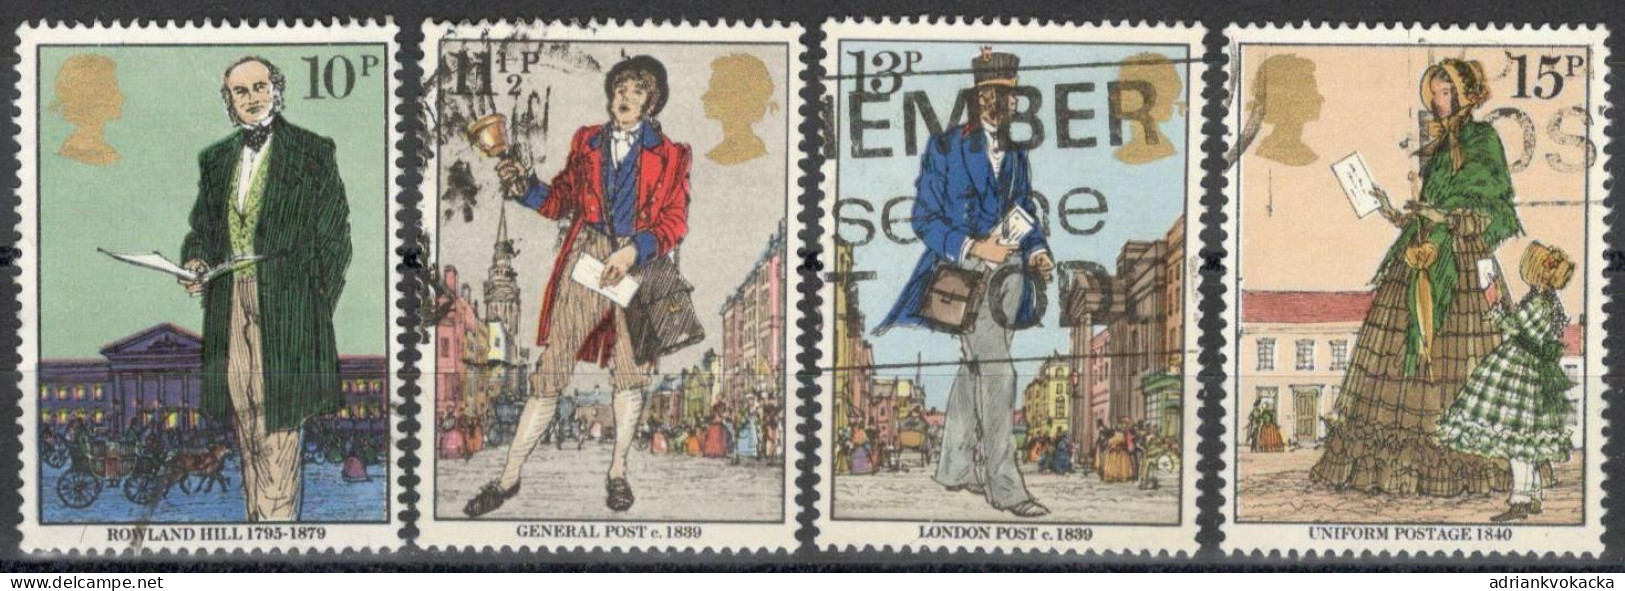 United Kingdom - Centenary Of The Death Of Sir Rowland Hill, Complete Series Of Cancelled Stamps Mi:GB 804-807 (1979) - Usados